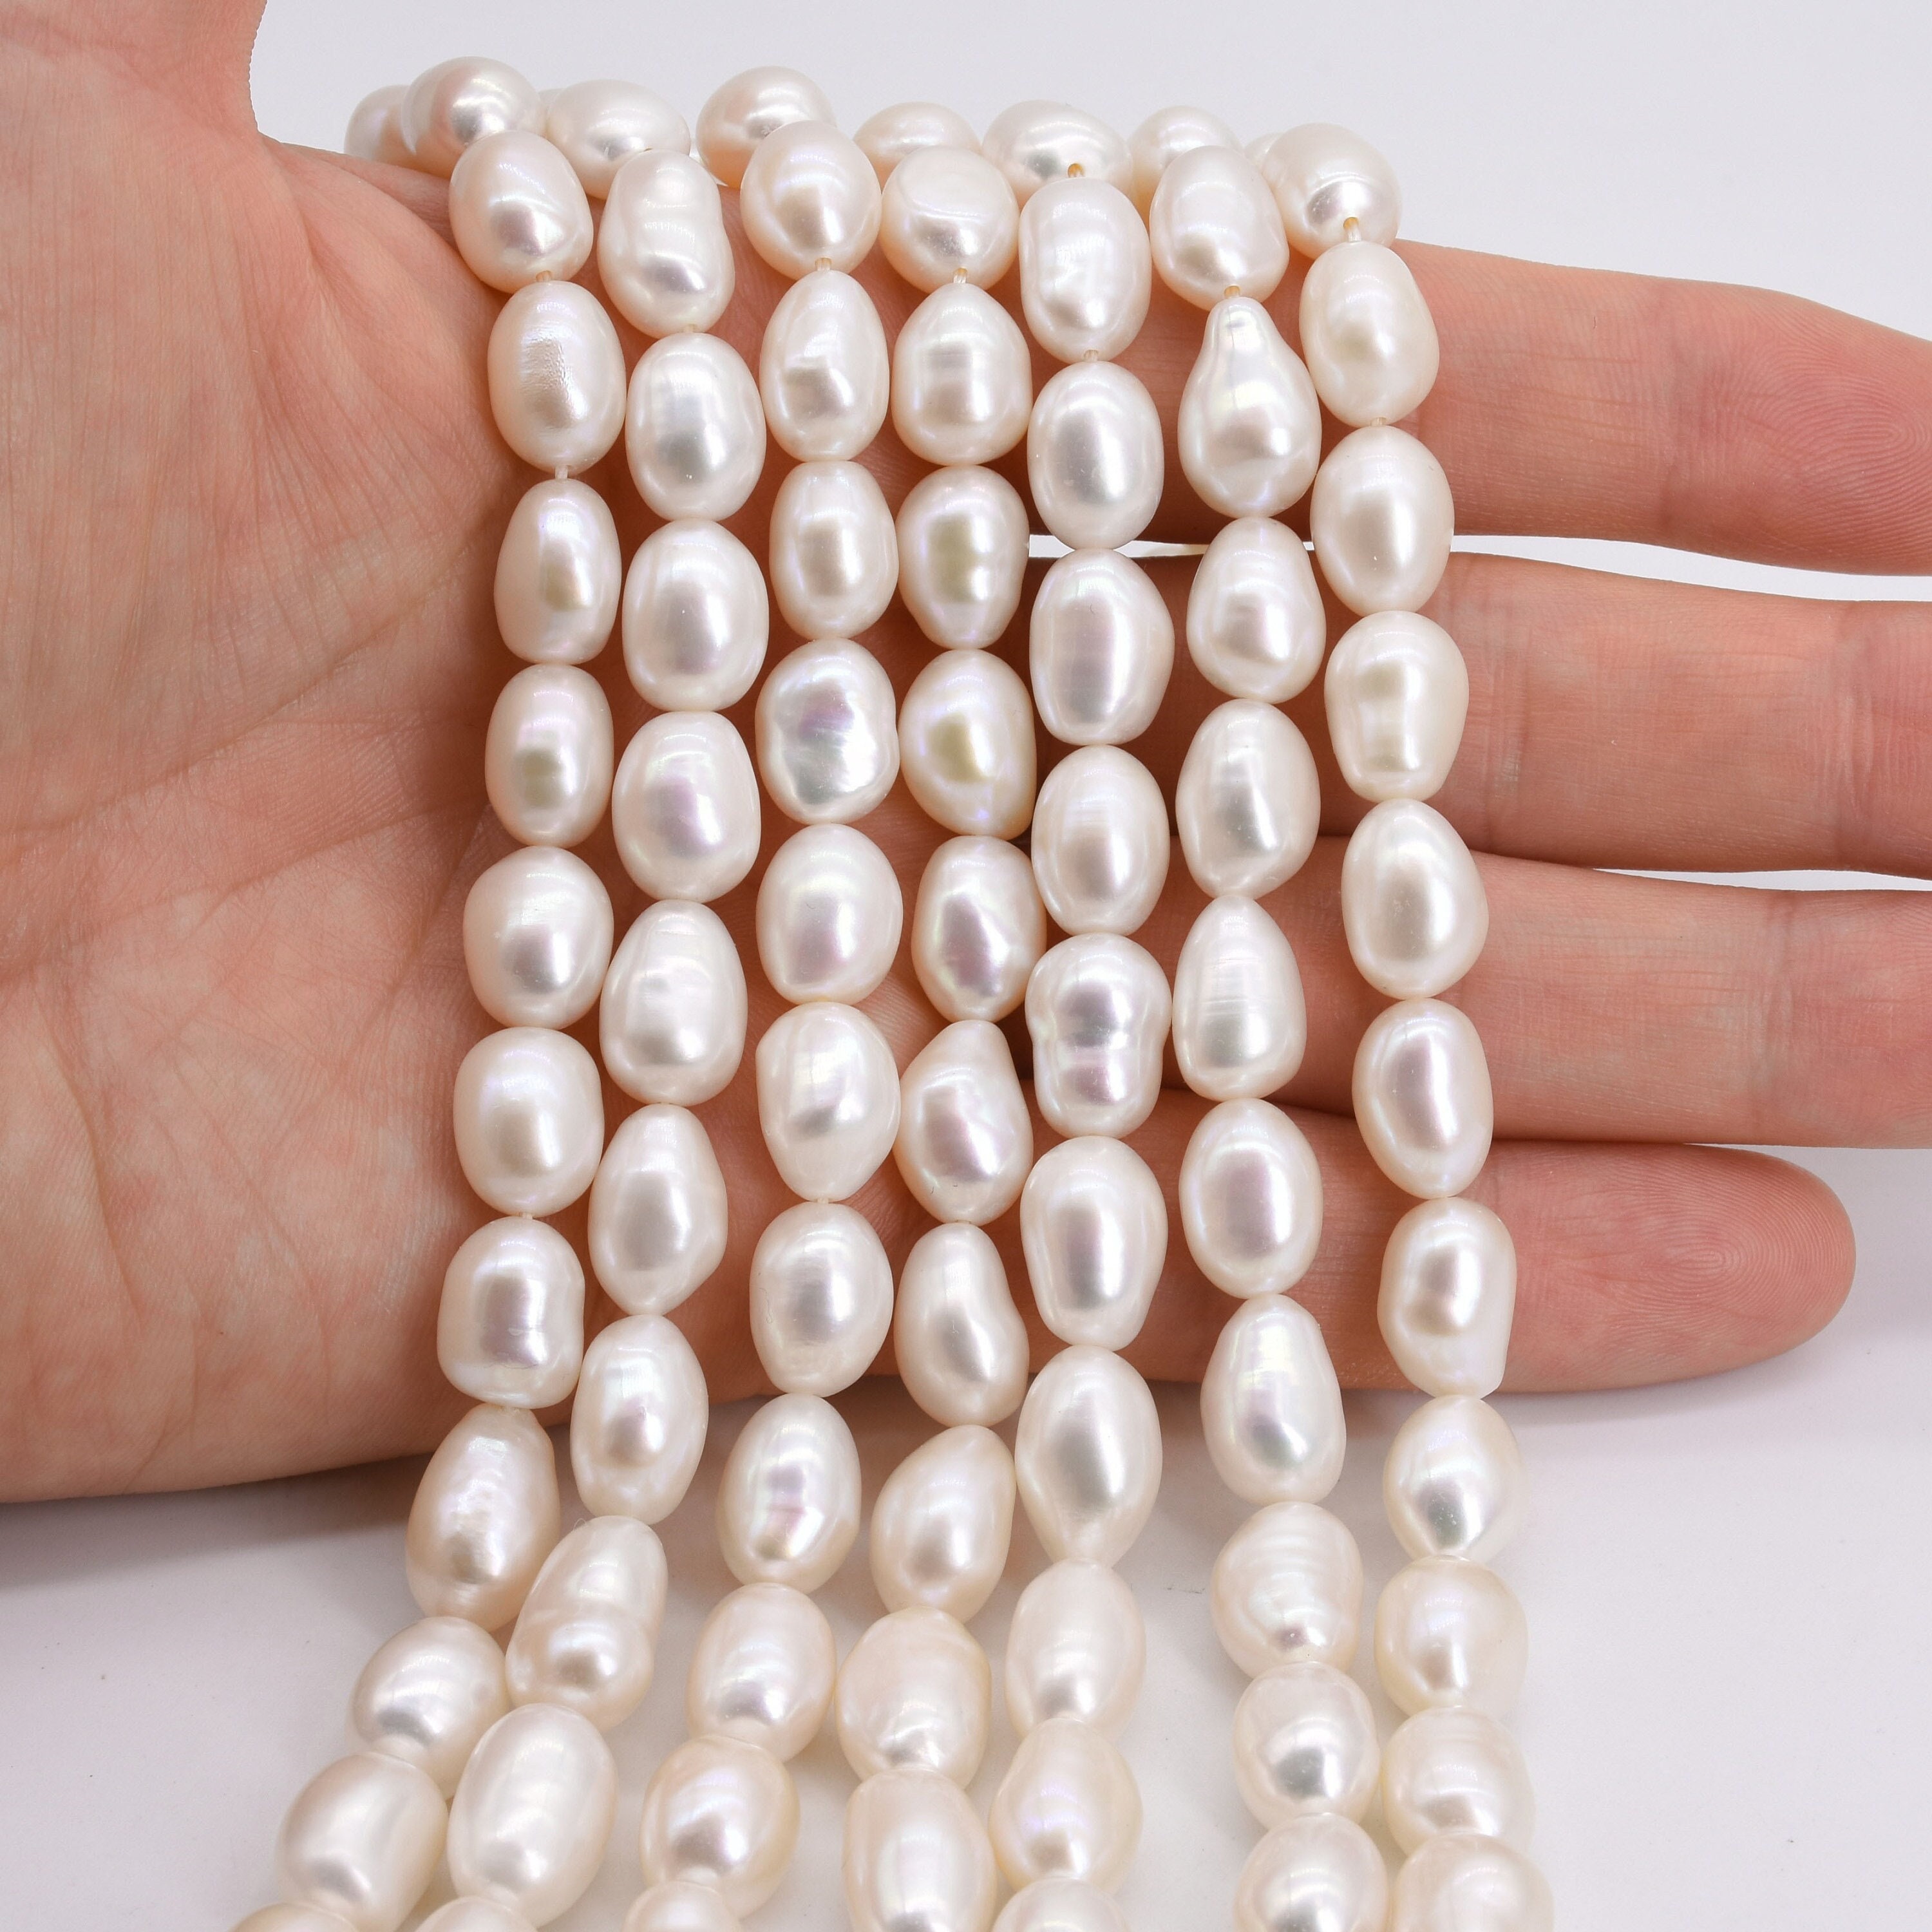 11-13mm Large Oval Shaped AA Quality White Rice Pearls Strands